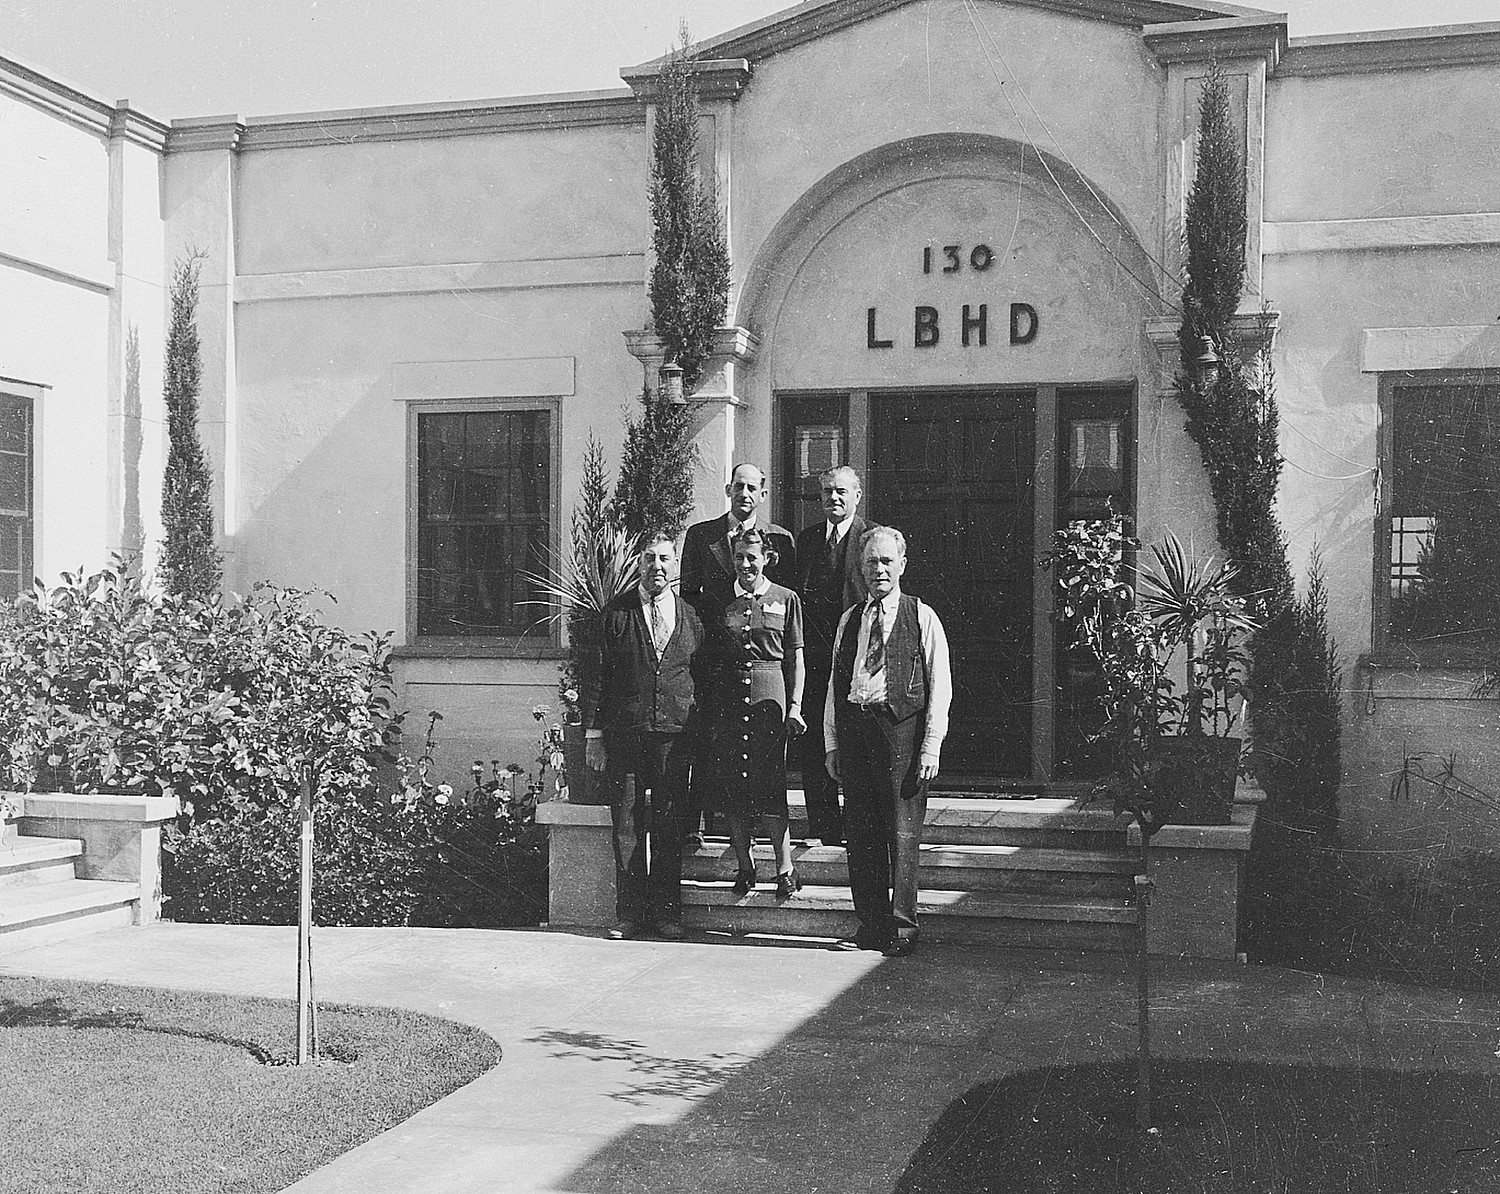 Harbor Department staff pose for a photo outside Port HQ in 1938.